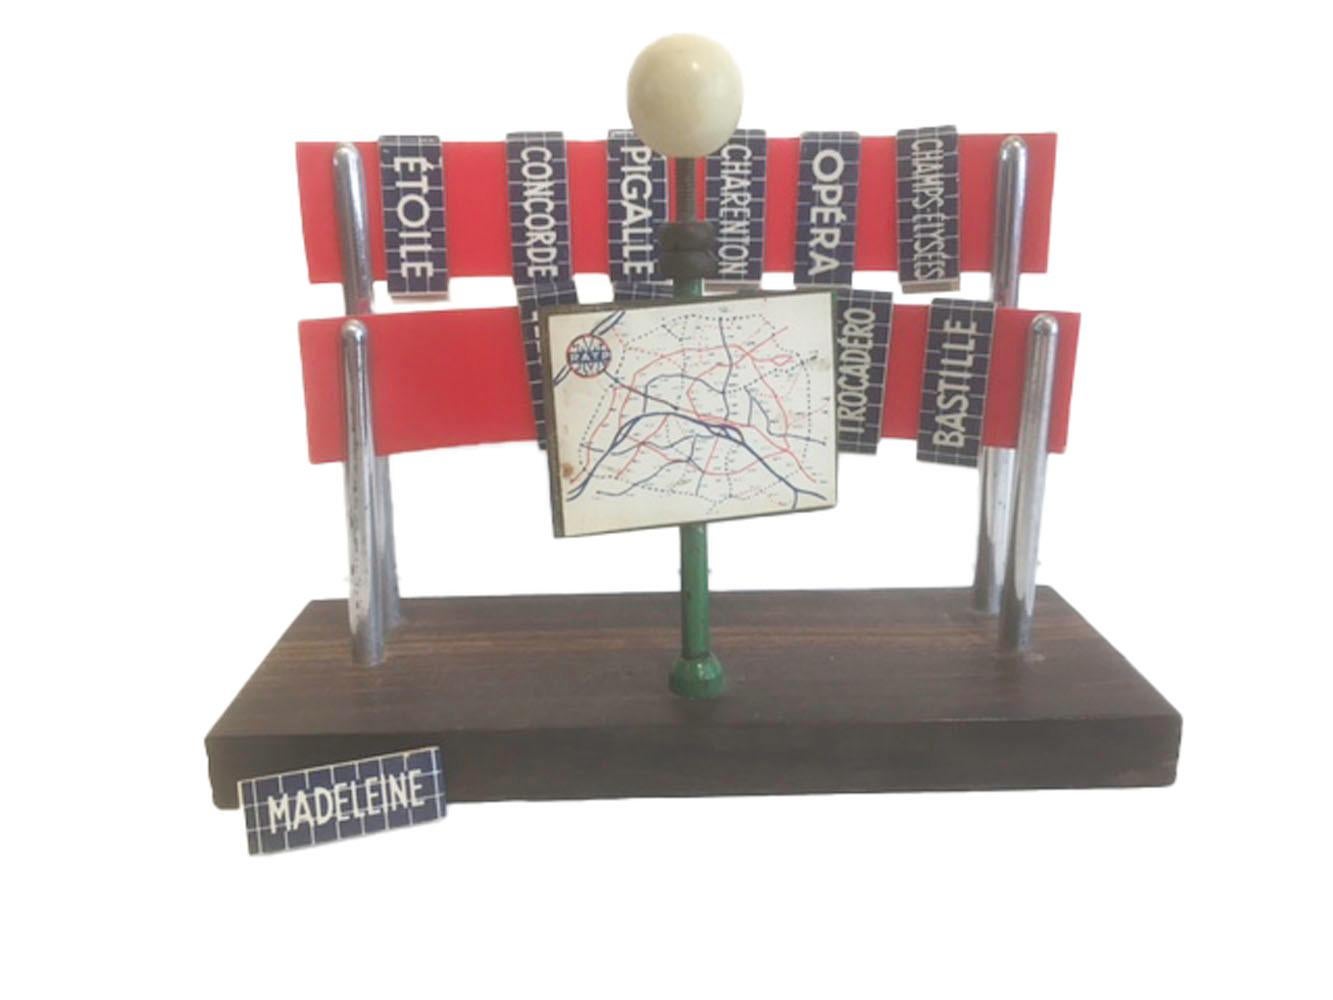 Art Deco drink markers with the names of Paris Metro stations. The celluloid markers printed with station names clip onto two celluloid banners raised on pairs of chrome posts behind a painted lamppost holding a map of the Paris Metro System. Clip a